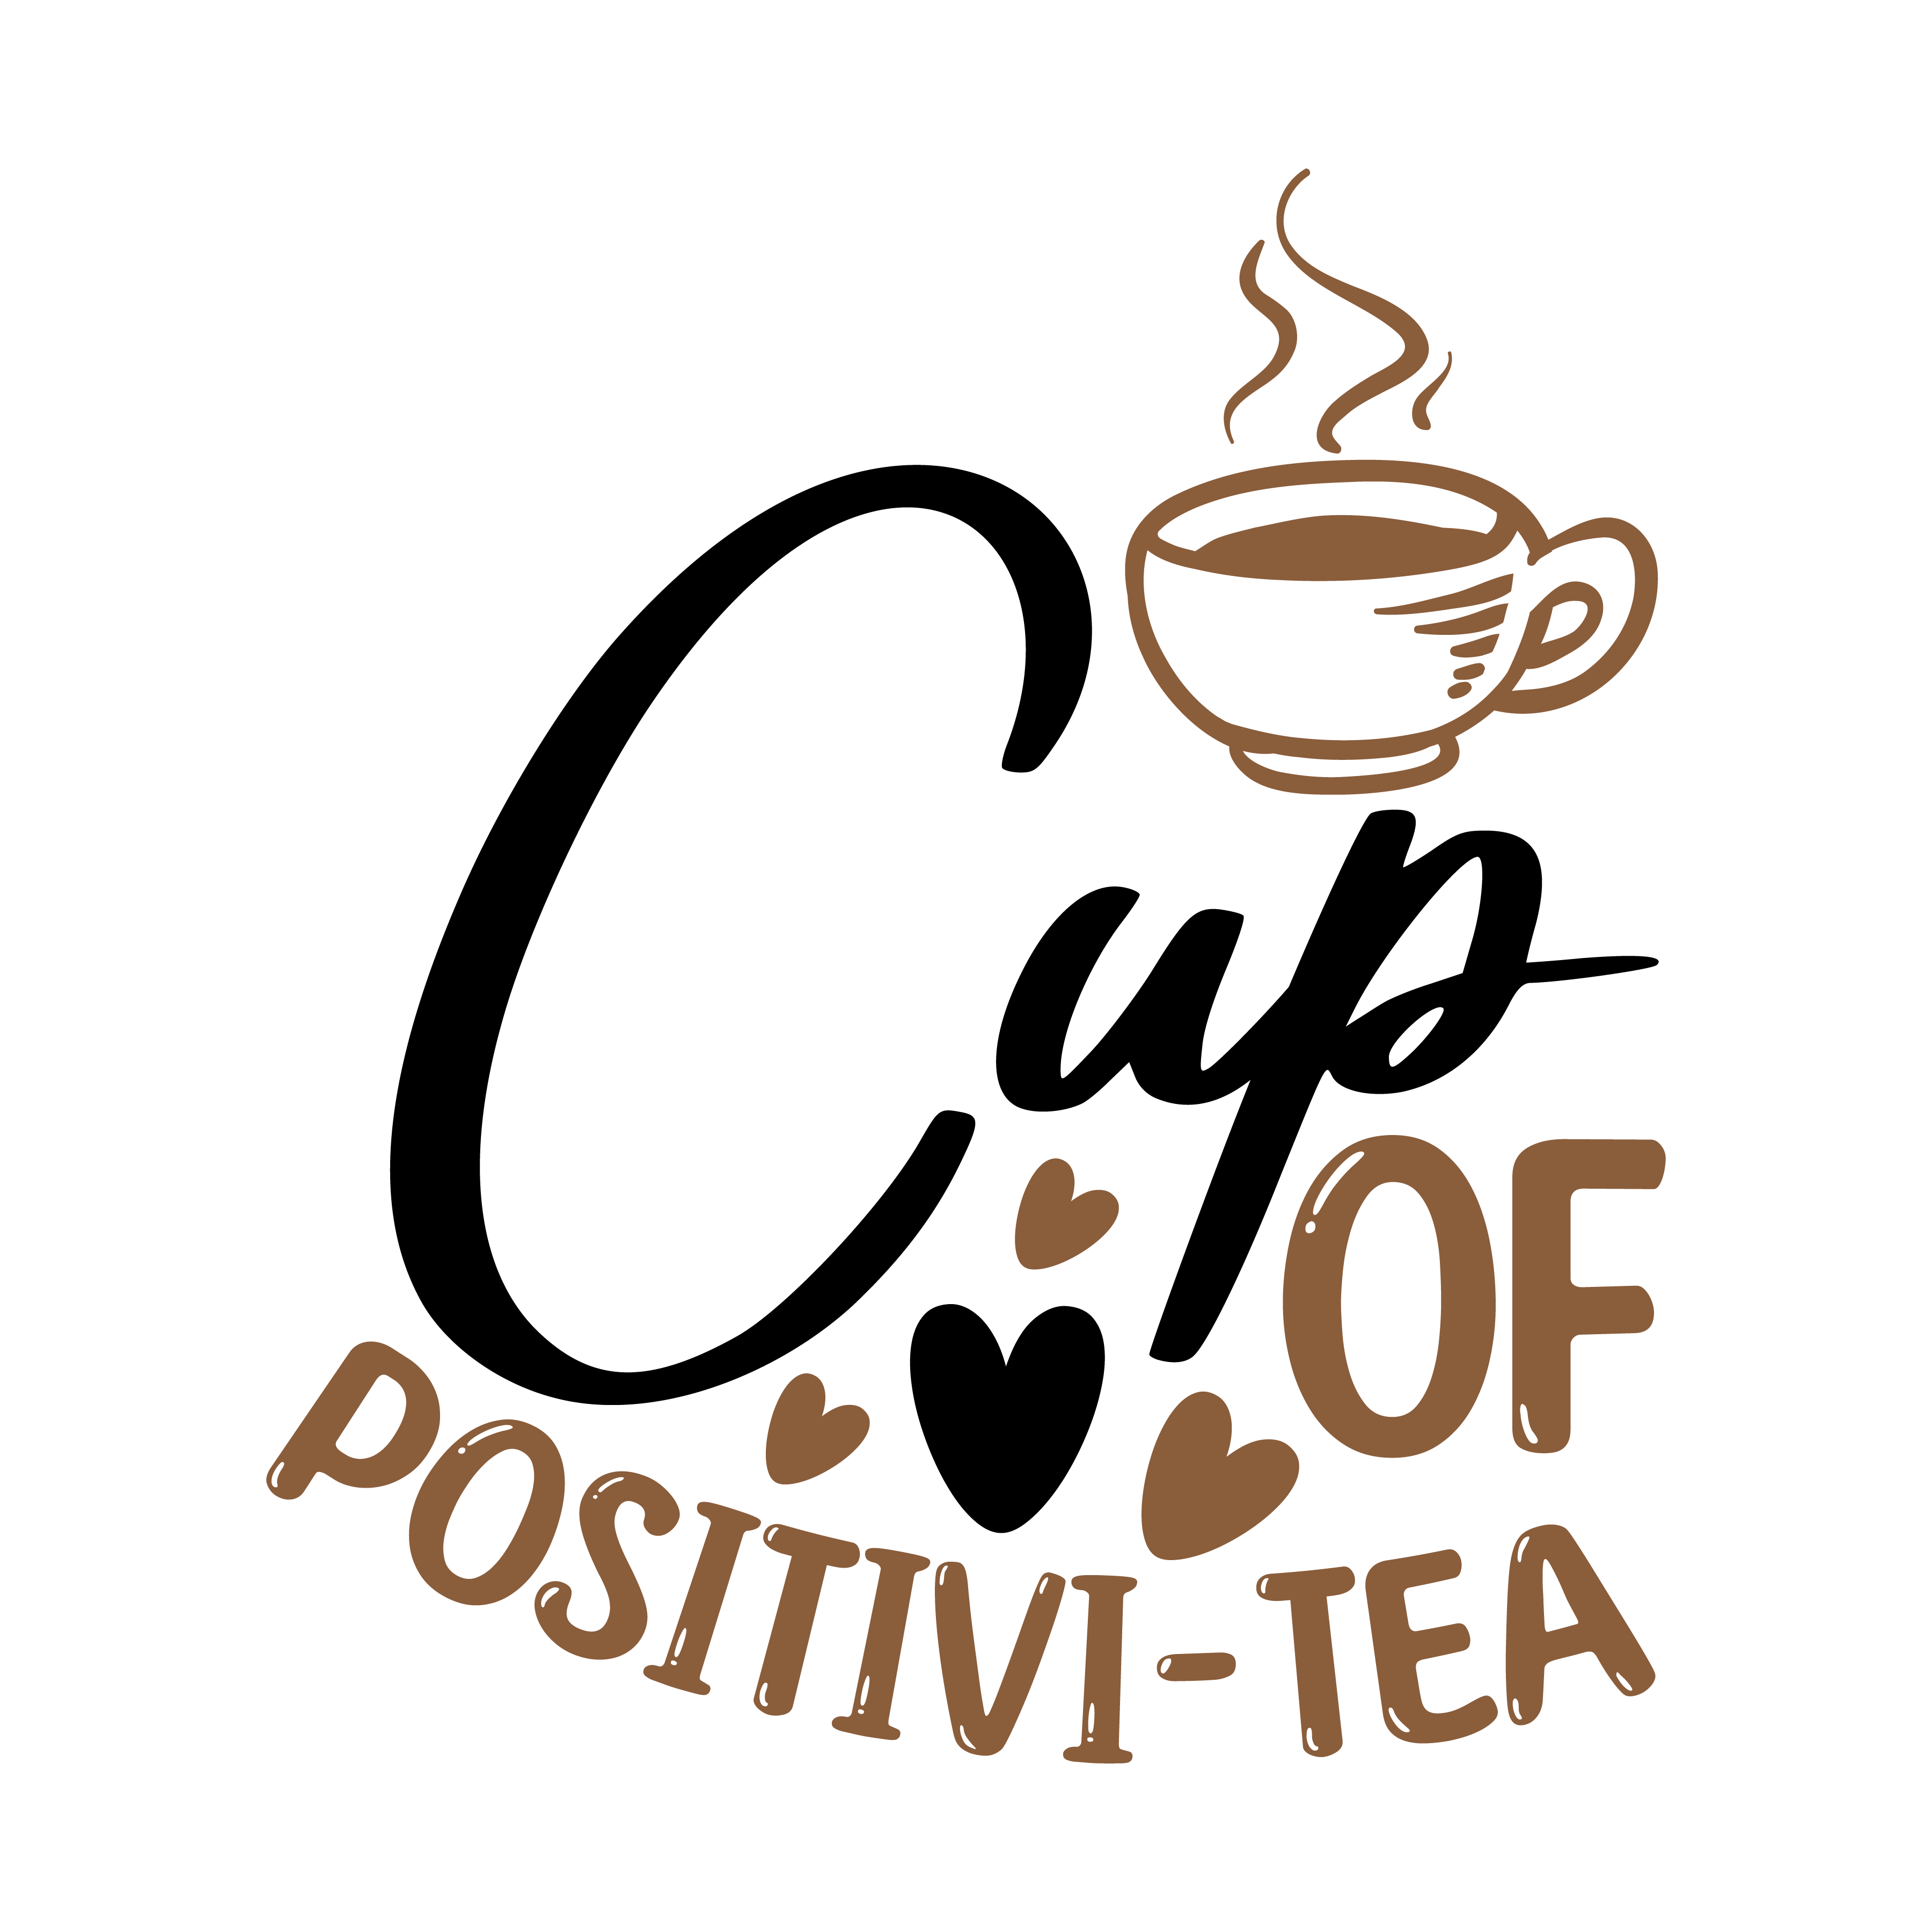 cup of positivi tea, tea sayings, tea quotes, Cricut designs, free, clip art, svg file, template, pattern, stencil, silhouette, cut file, design space, short, funny, shirt, cup, DIY crafts and projects, embroidery